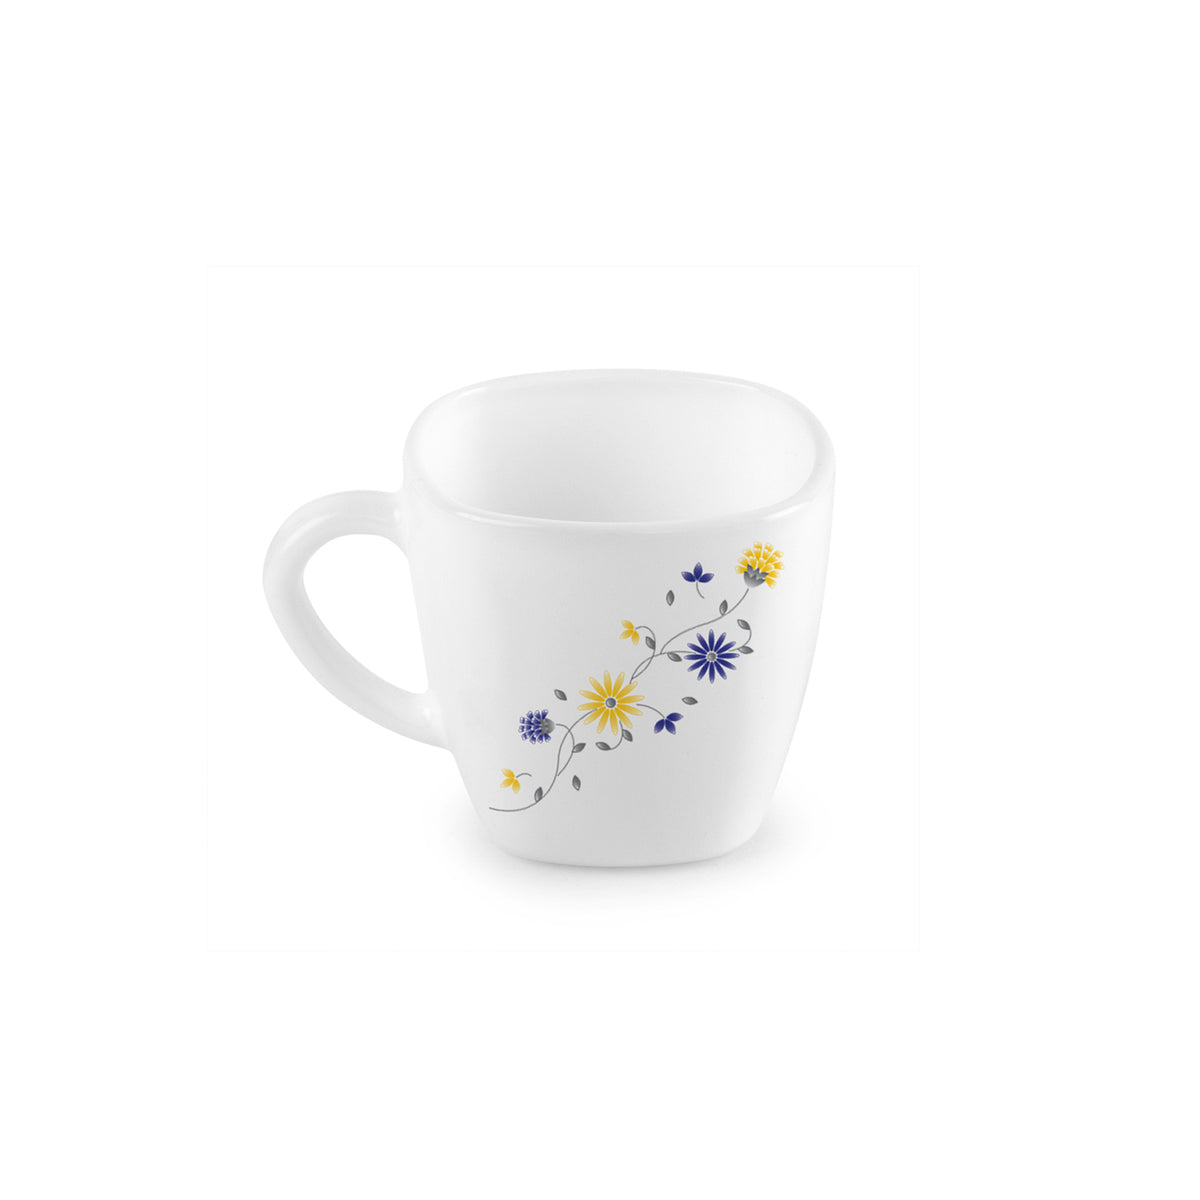 Small|Imperial Blooming Daisy 6 Pieces Vogue Mug / 6 Pieces